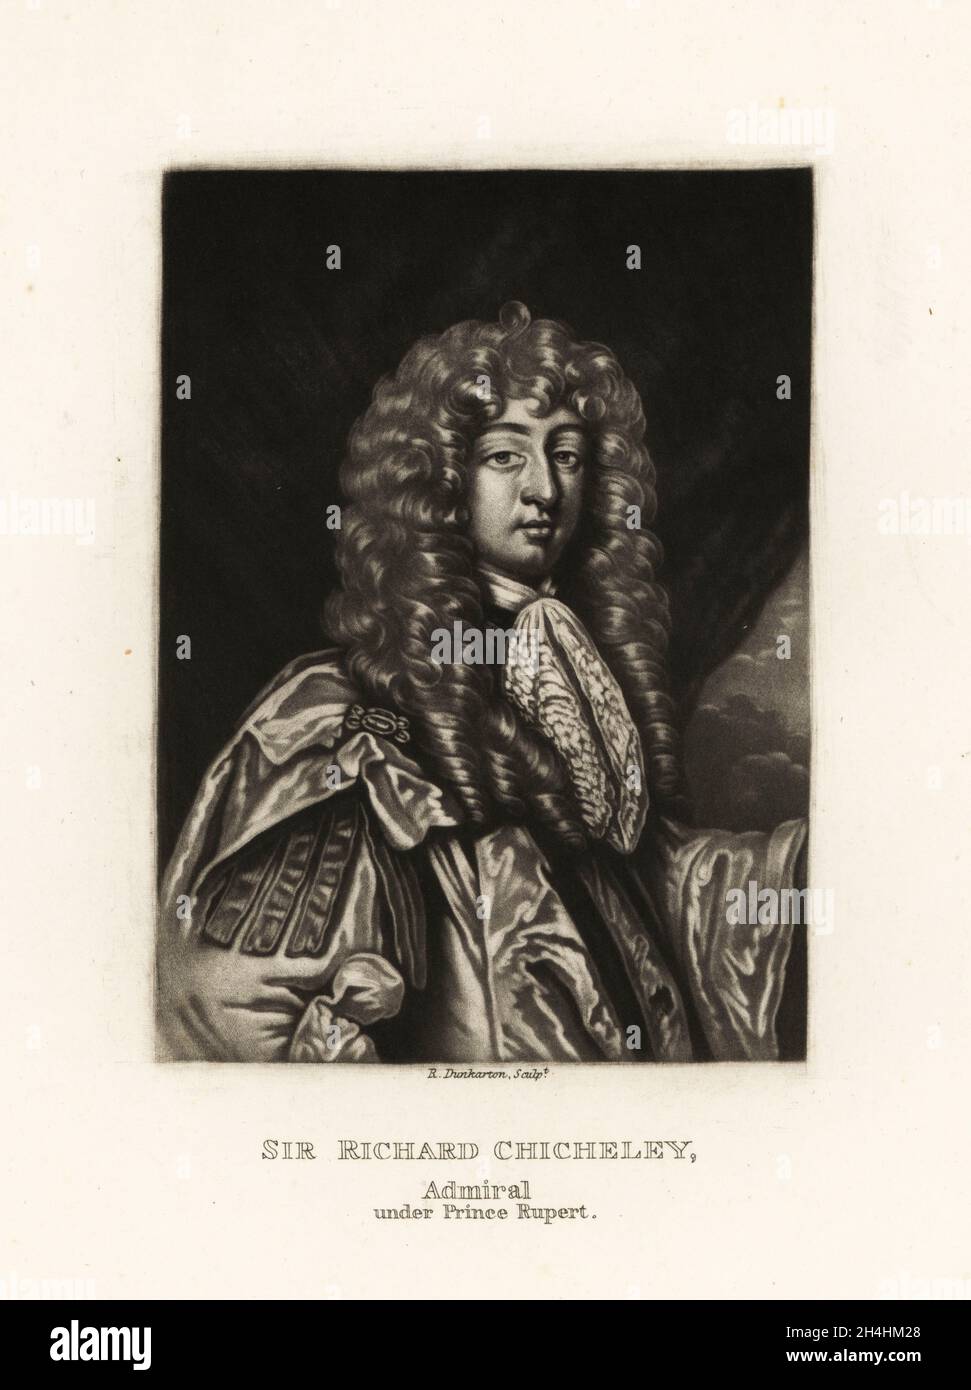 Rear Admiral Sir John Chicheley, c. 1640-1691, Royal Naval officer who commanded a squadron at the battles of Schooneveld and Texel during the Franco-Dutch War. Mislabeled Sir Richard Chicheley. Mezzotint engraving by Robert Dunkarton after a portrait by Sir Peter Lely from Richard Earlom and Charles Turner's Portraits of Characters Illustrious in British History Engraved in Mezzotinto, published by S. Woodburn, London, 1814. Stock Photo